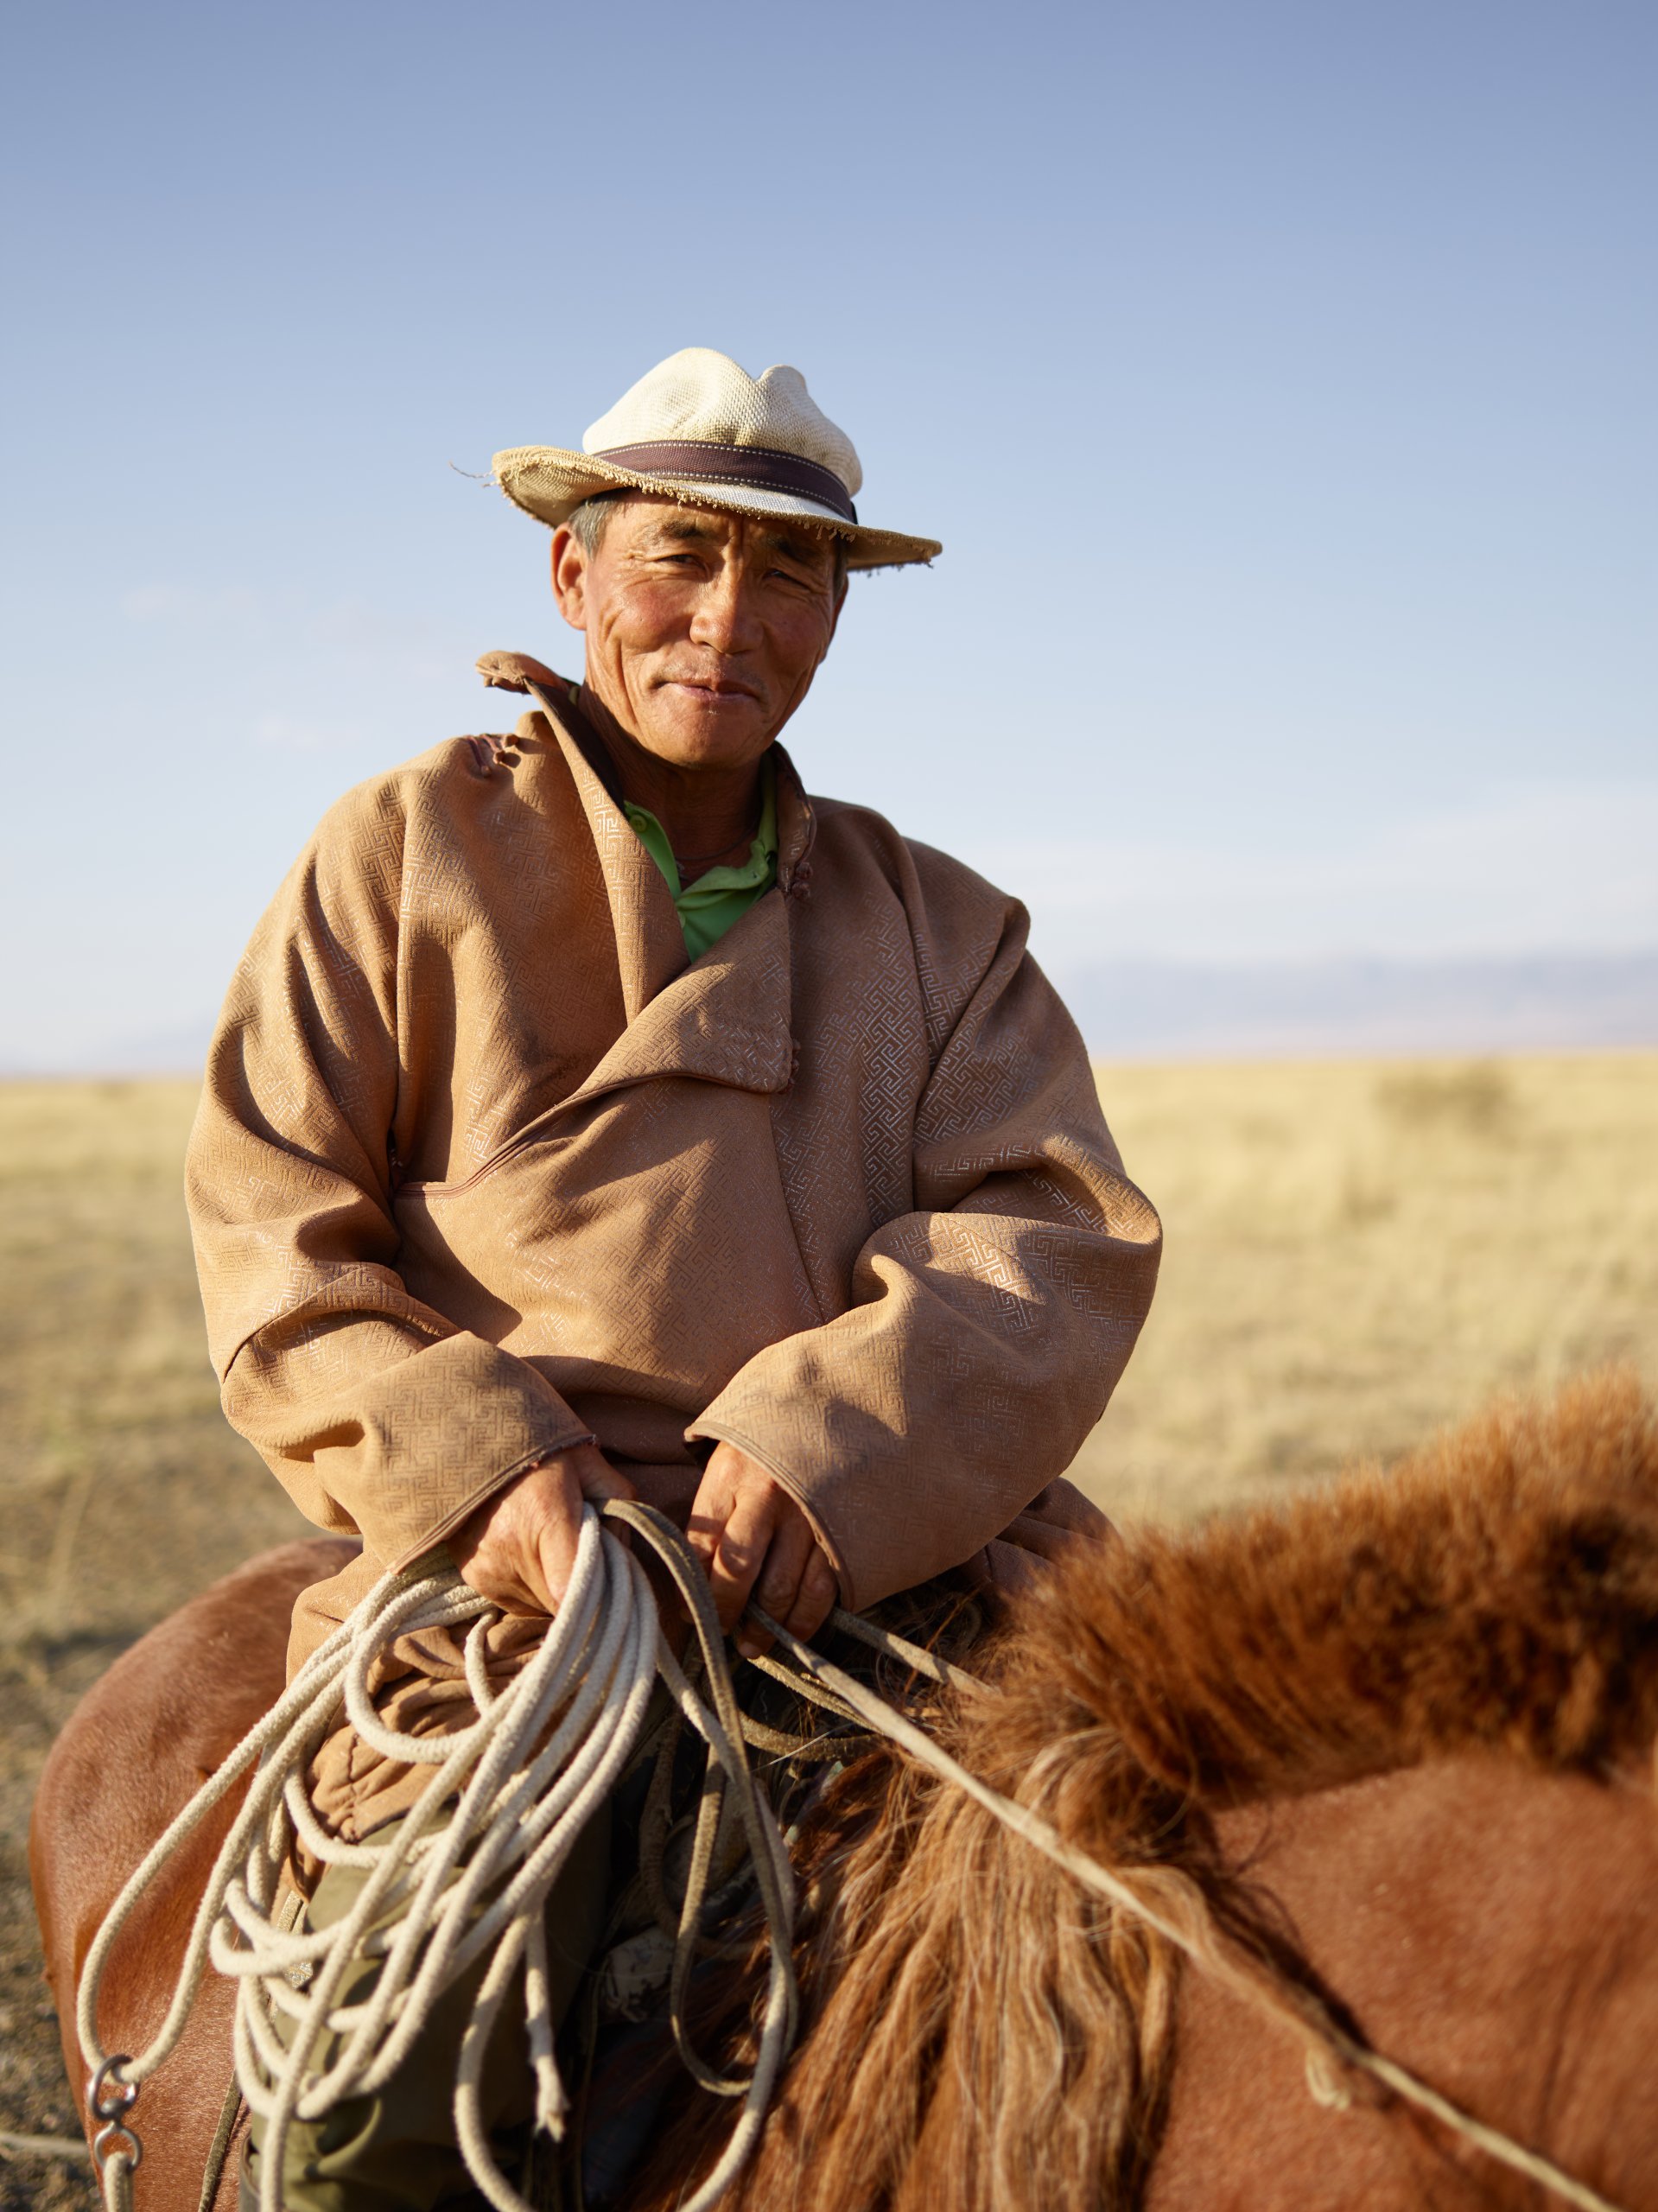 Image of a smiling, older man on horseback who looks like he has been there and done that. Article is about self development work